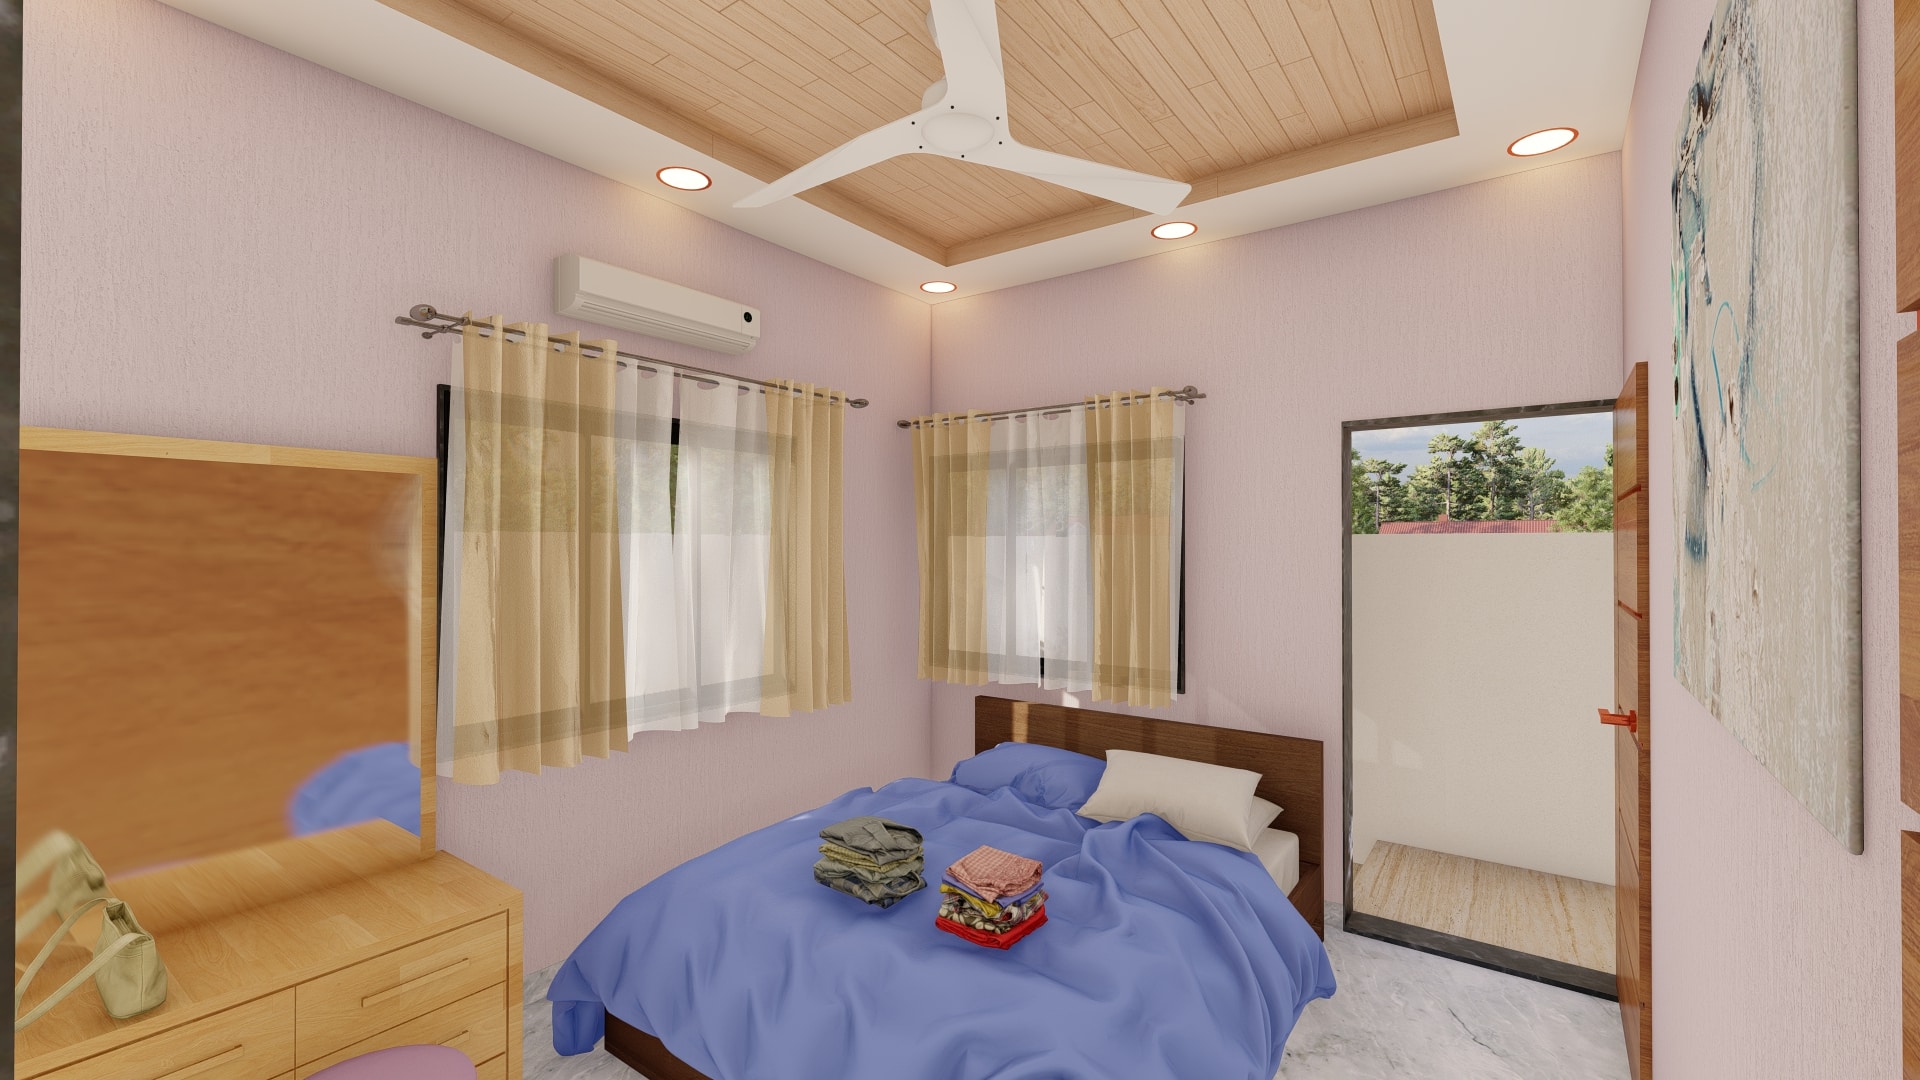 bedroom of modern bungalow house layout by urban terrace east facing 30x50 sq ft